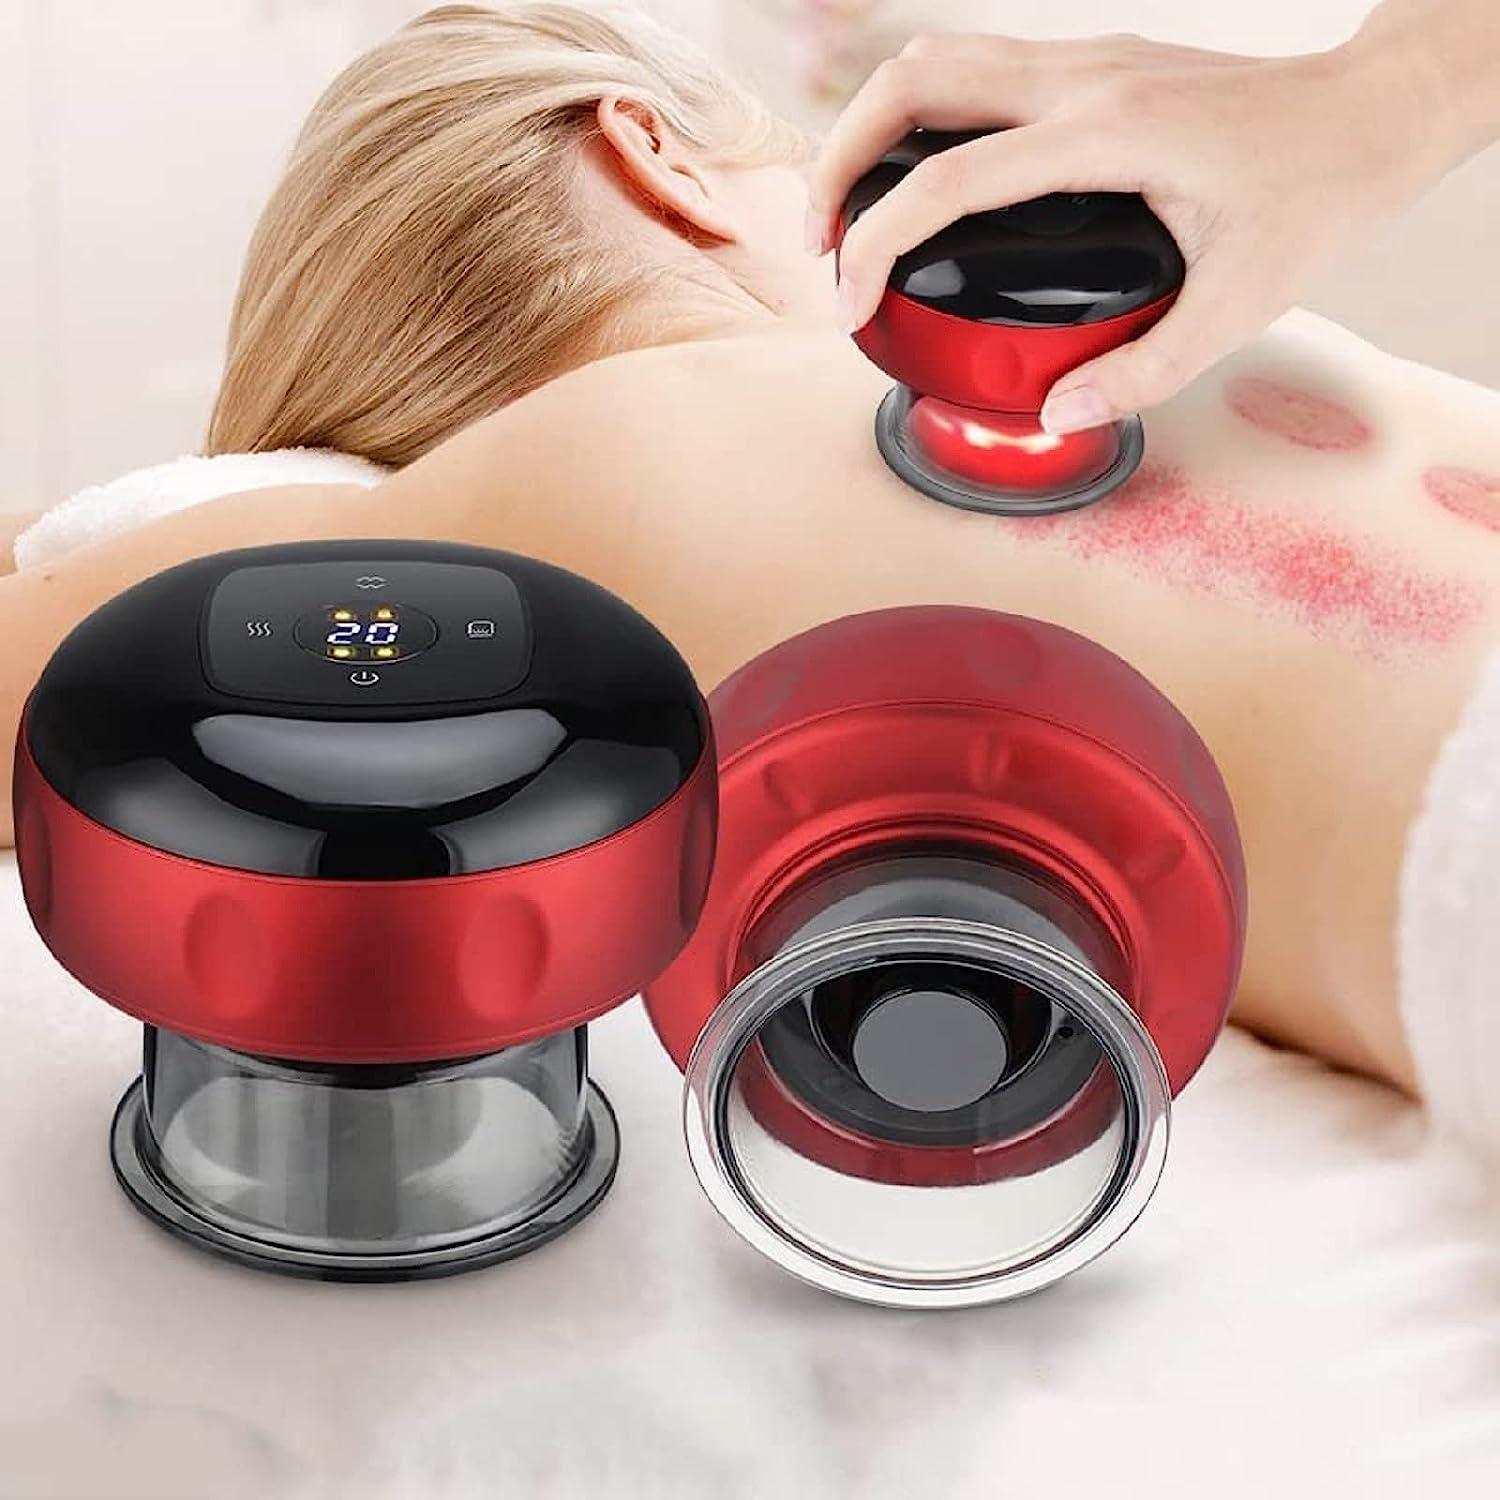 Vacuum Cupping Massage Anti Cellulite Magnet Therapy - ApnaBuyer